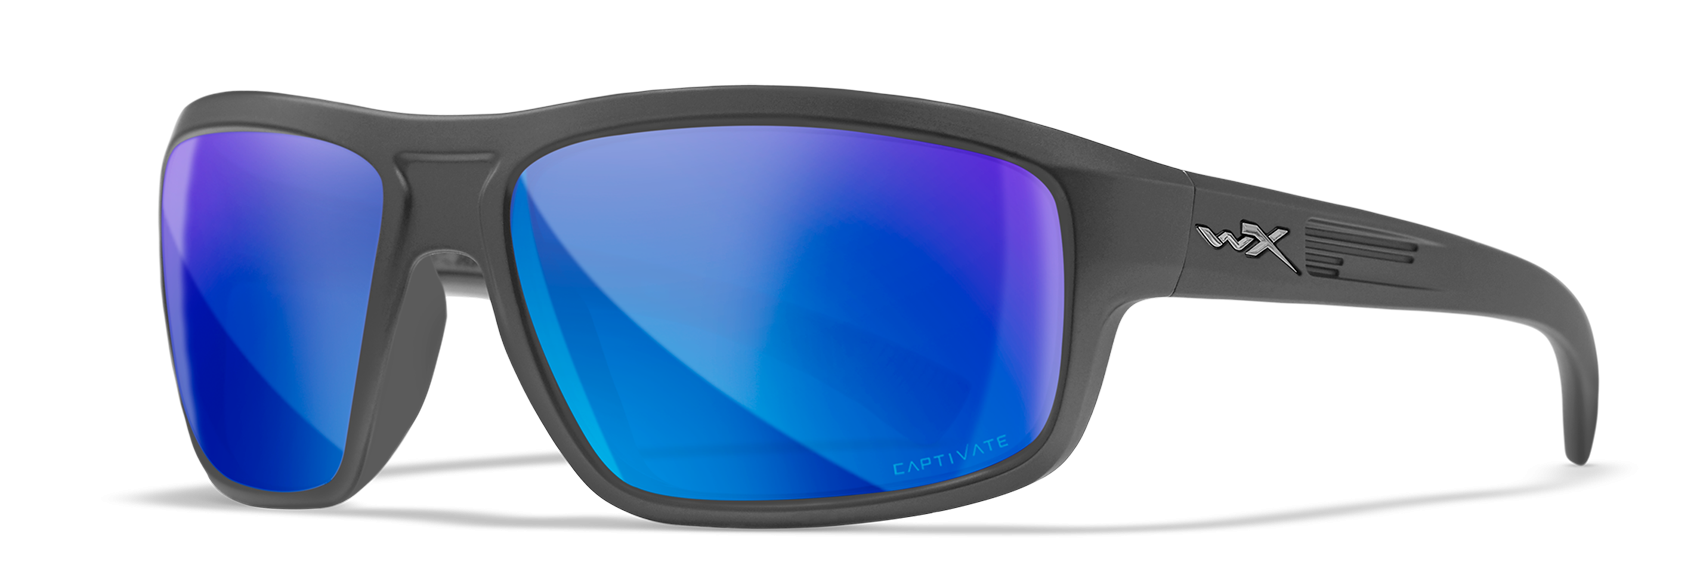 Wiley X Contend Sunglasses, 3 colors